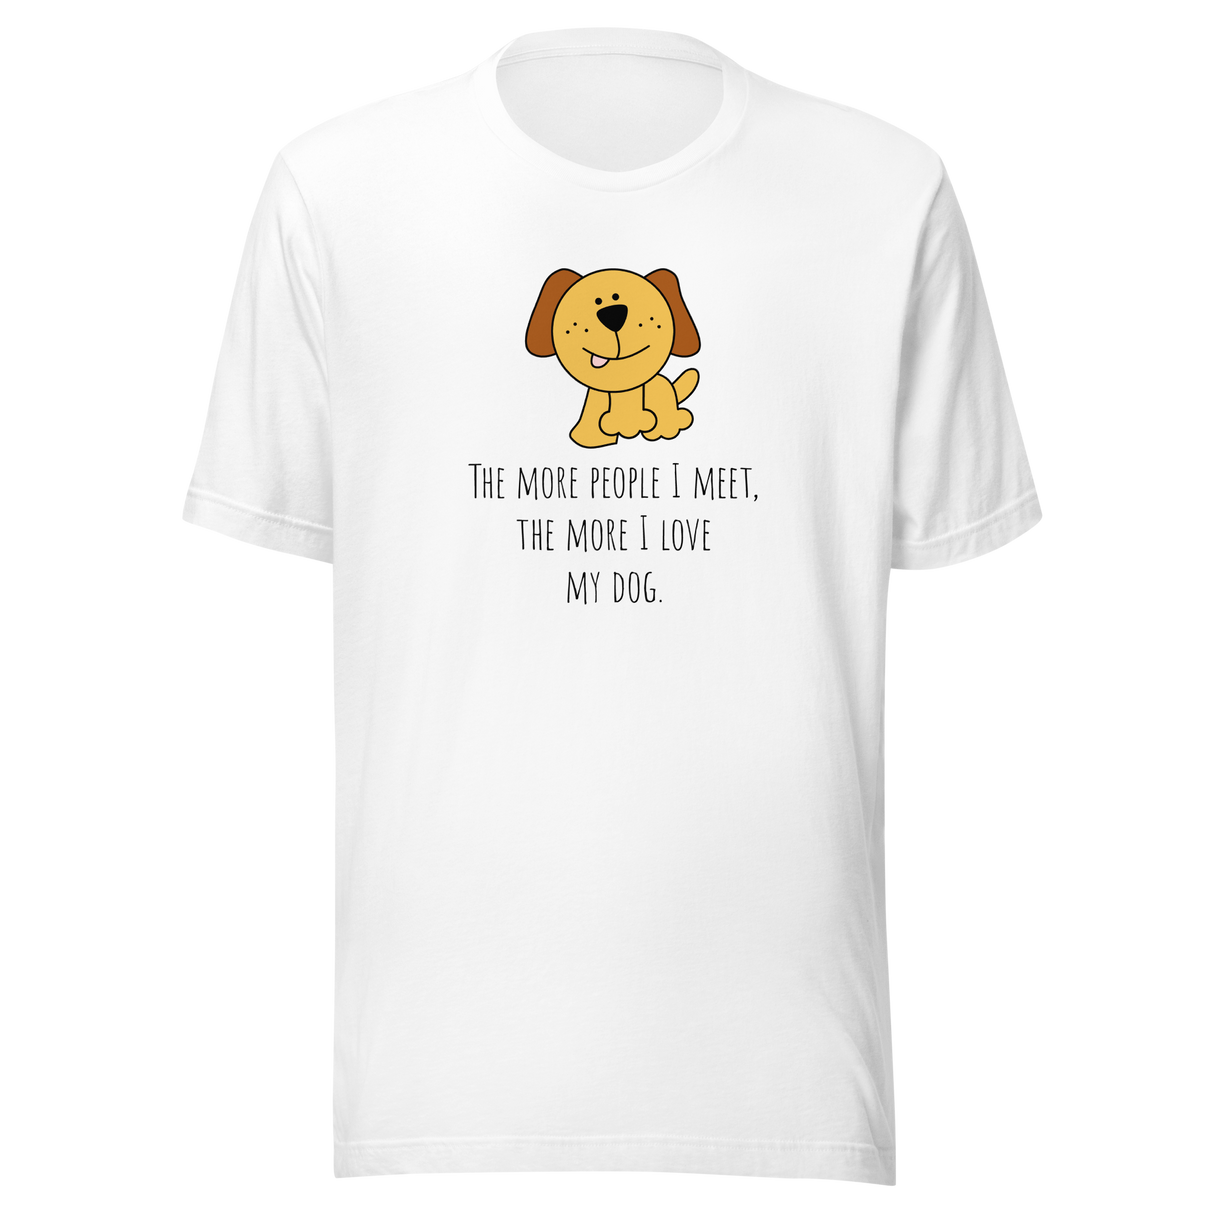 the-more-people-i-meet-the-more-i-love-my-dog-love-my-dog-tee-dog-t-shirt-dog-lover-tee-puppy-t-shirt-dog-mom-tee#color_white